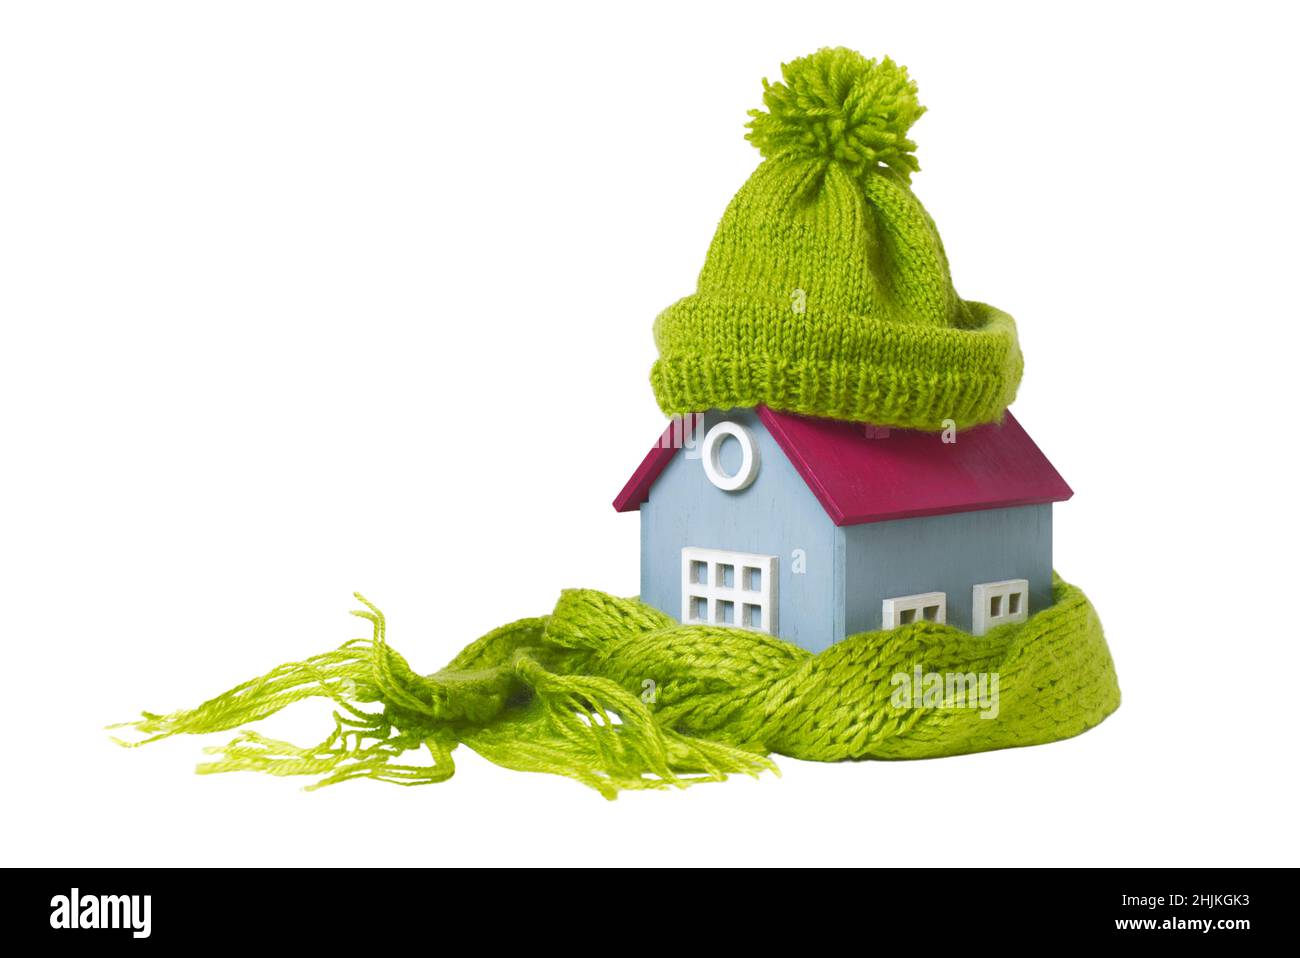 Conceptual Miniature Model House With Green Woolen hat and scarf, Isolated On White Background Stock Photo